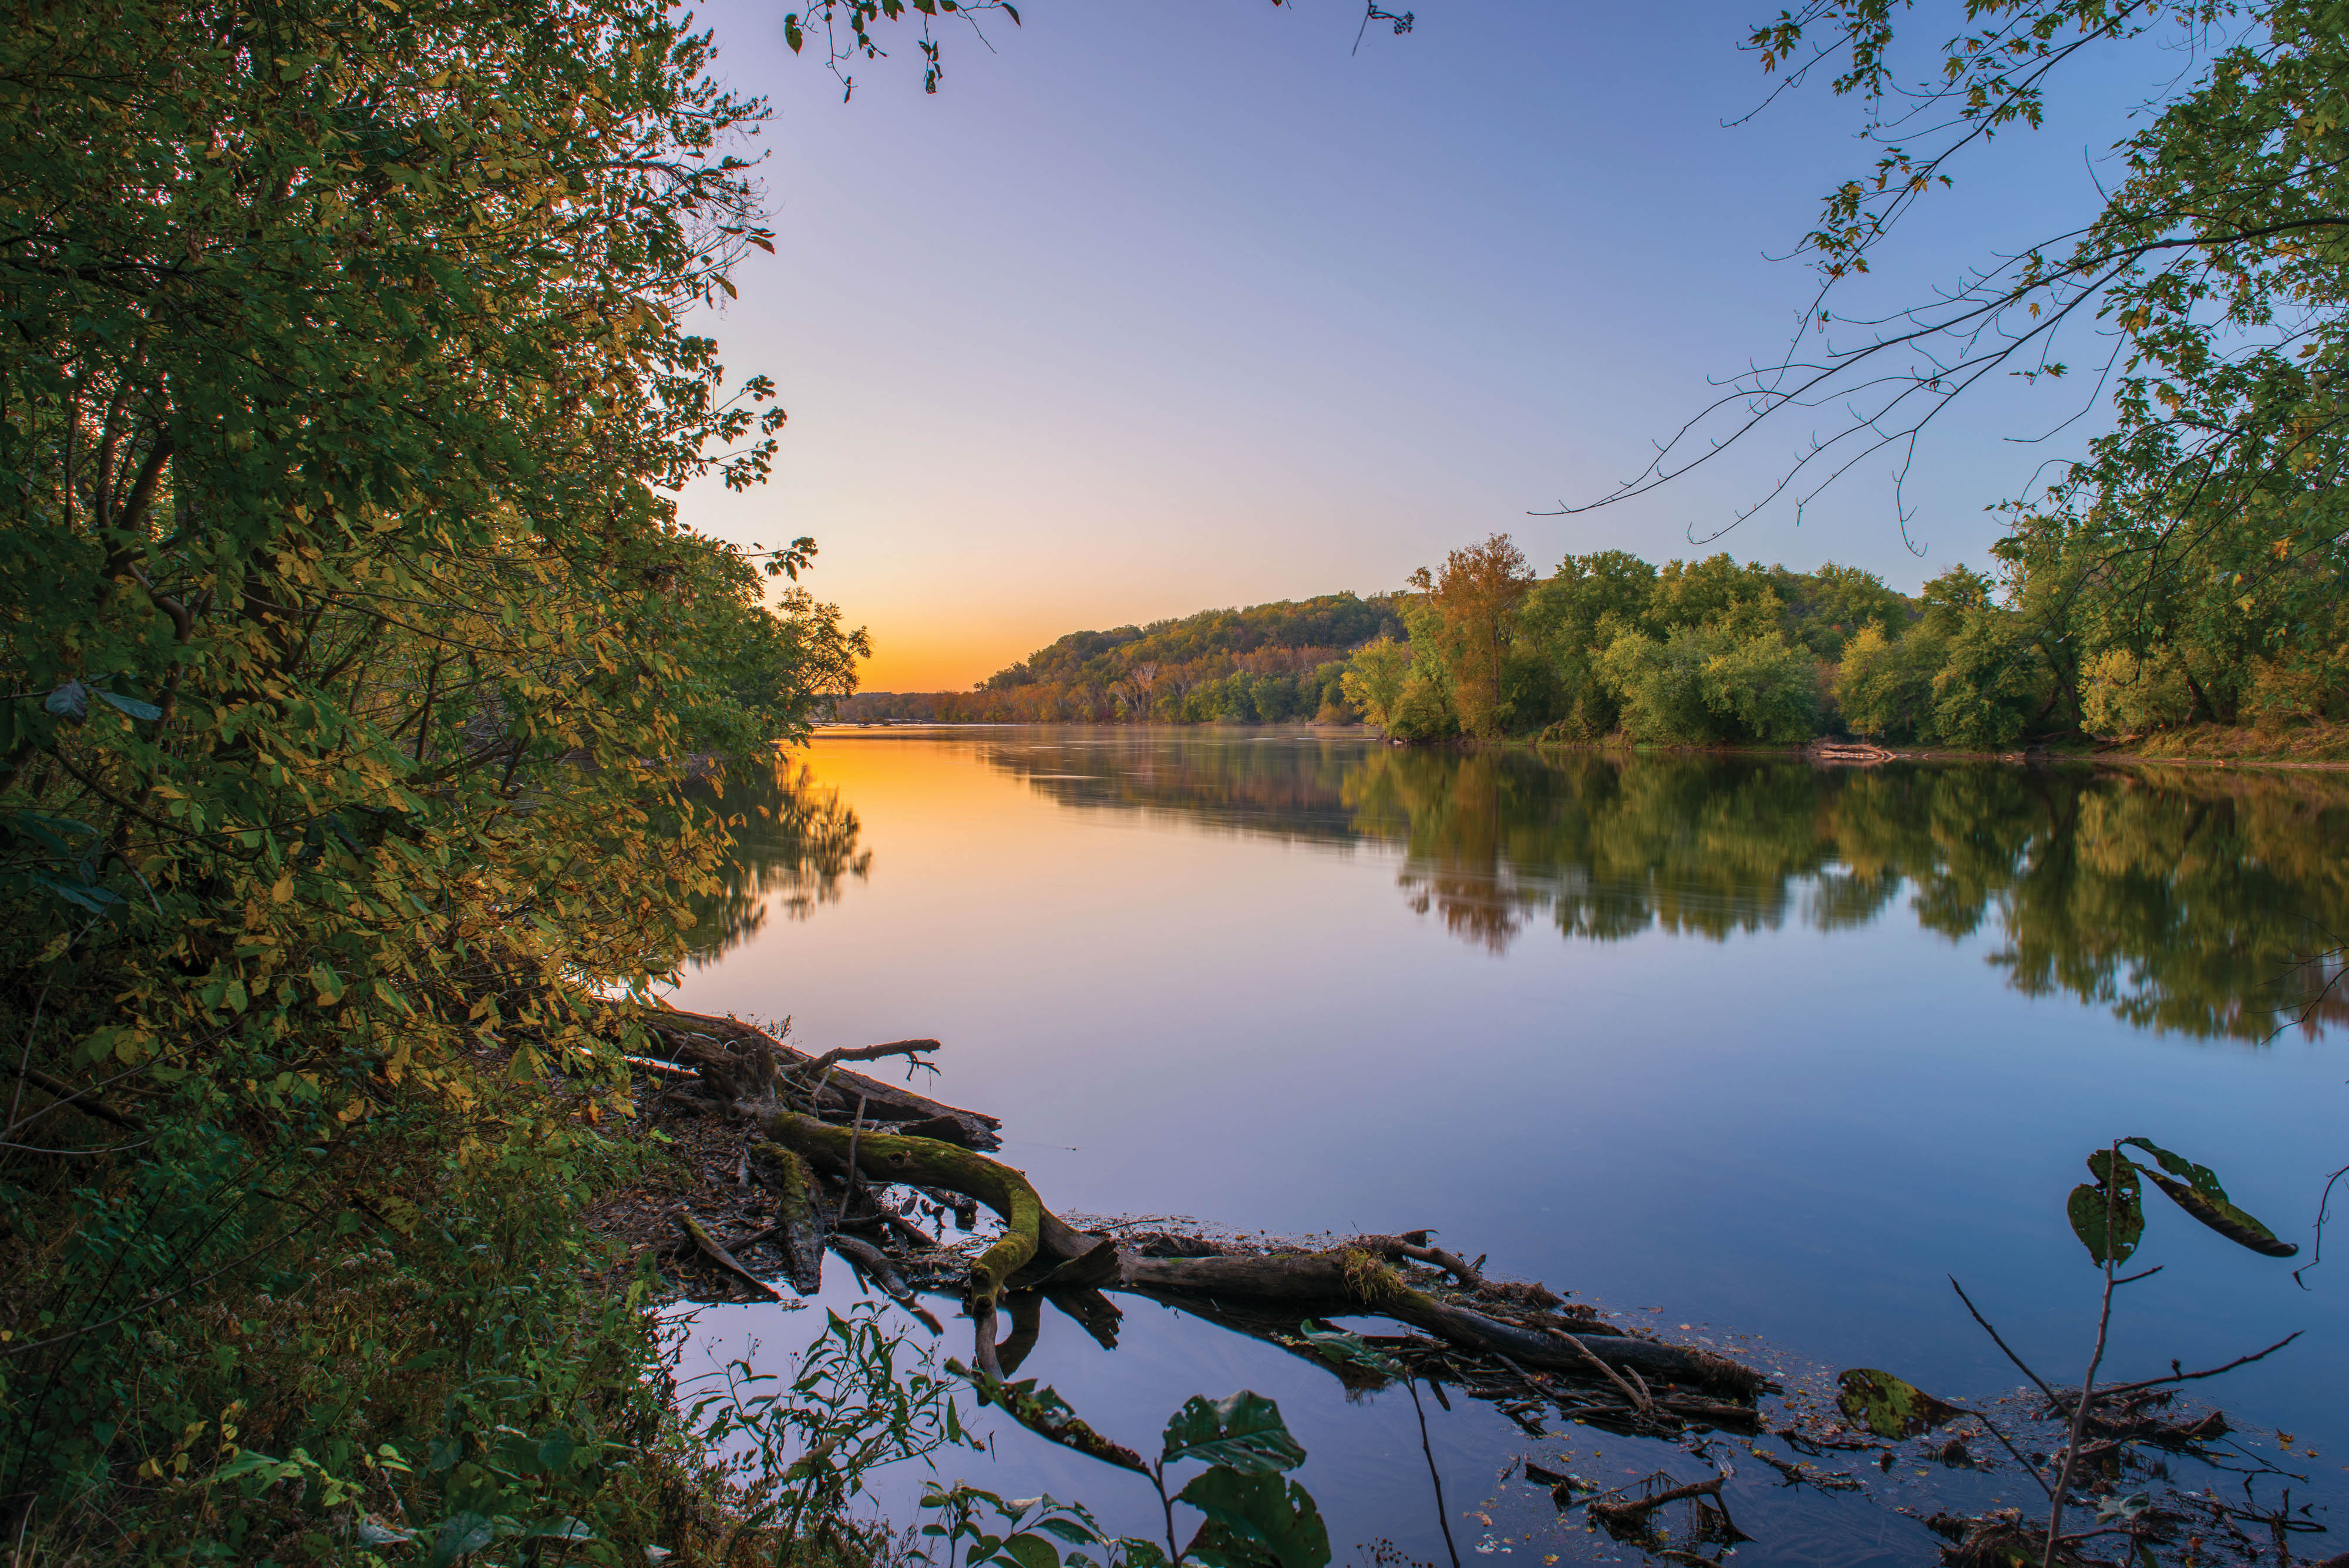 The Potomac River runs through Virginia's Fraser Preserve. The tree lined banks are reflected in the mirror-like surface of the water as the horizon glows in the light of the rising sun.